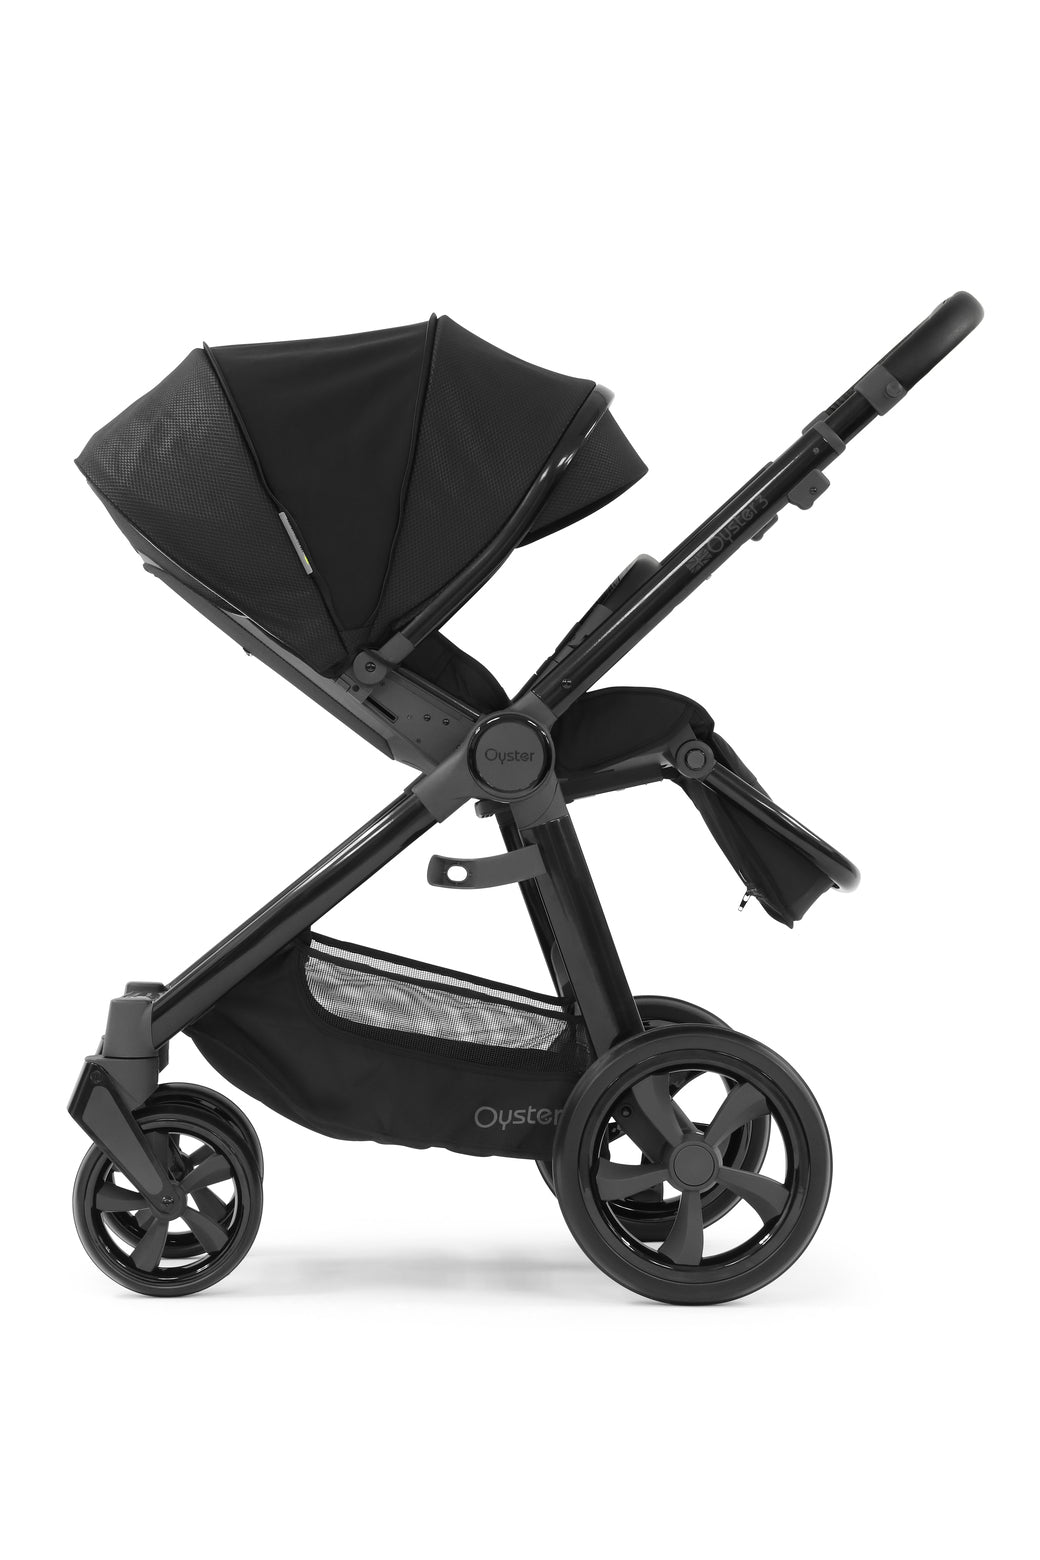 Babystyle Oyster 3 Luxury 7 Piece Travel System Bundle With Pebble 360 Pro - Pixel - For Your Little One